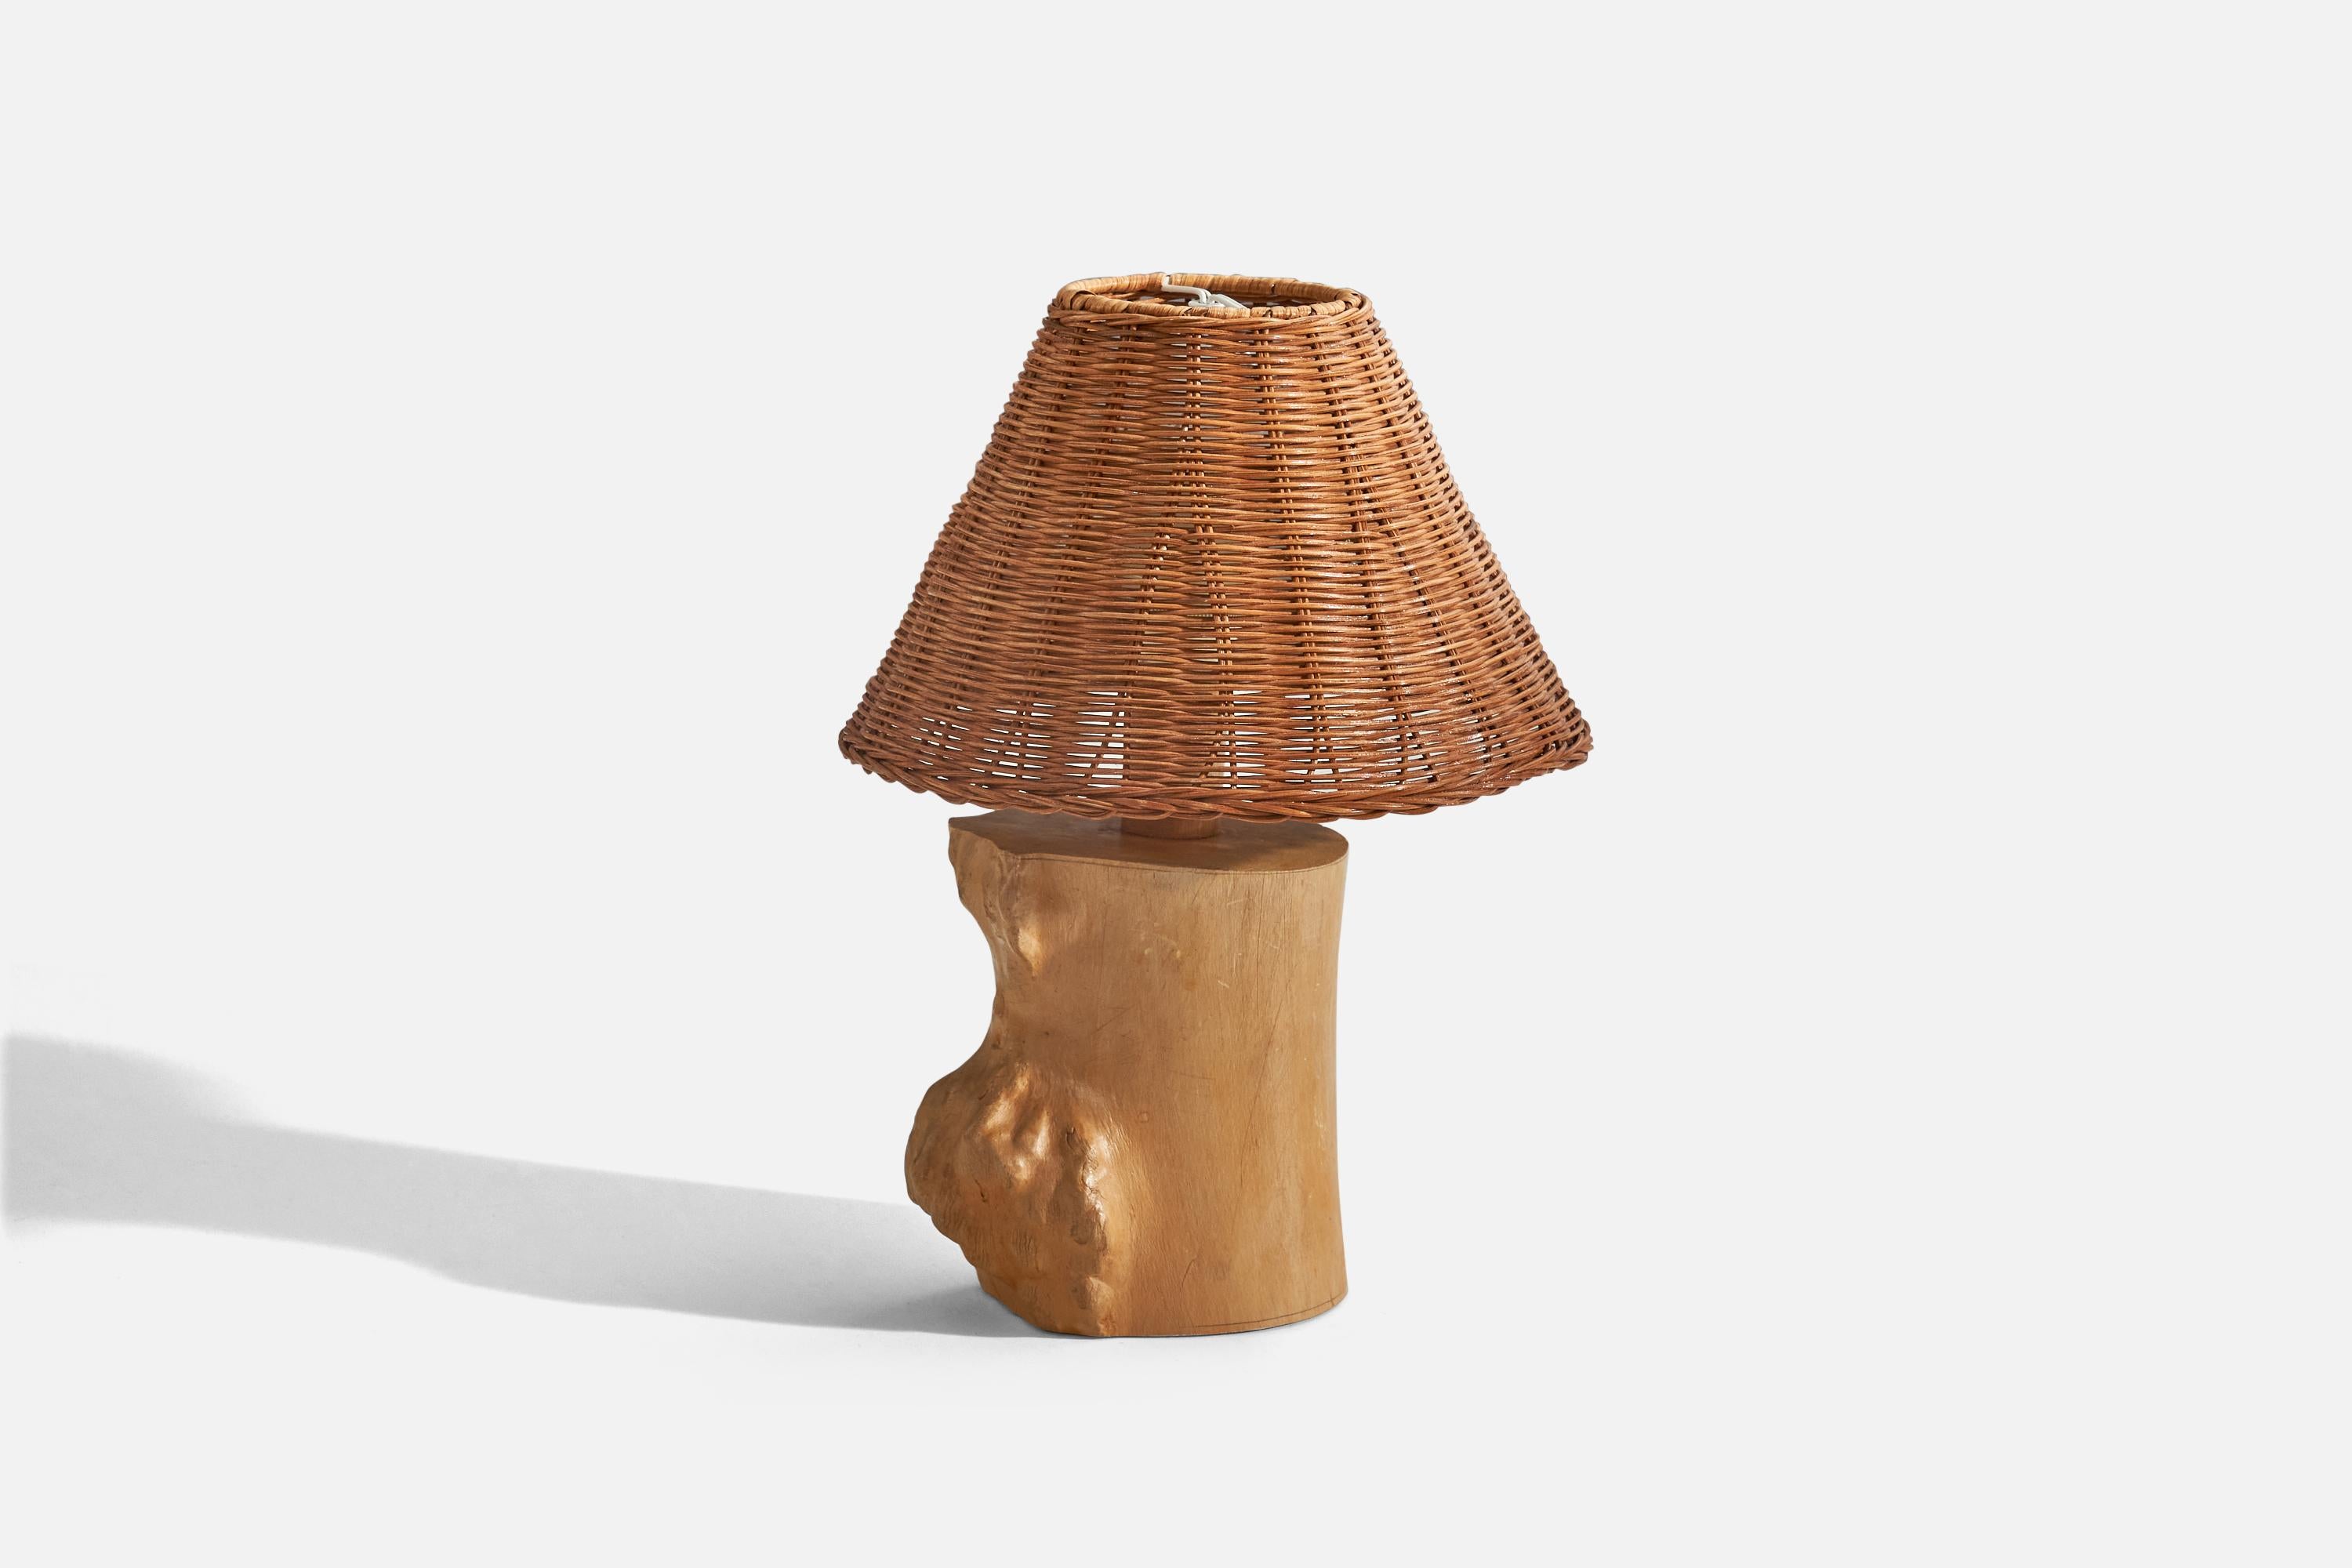 A freeform wood and rattan table lamp designed and produced in Sweden, initialed by artist and dated 1963.

Sold with lampshade. 
Dimensions of lamp (inches) : 9.62 x 5.35 x 4.15 (height x width x depth)
Dimensions of shade (inches) : 3.12 x